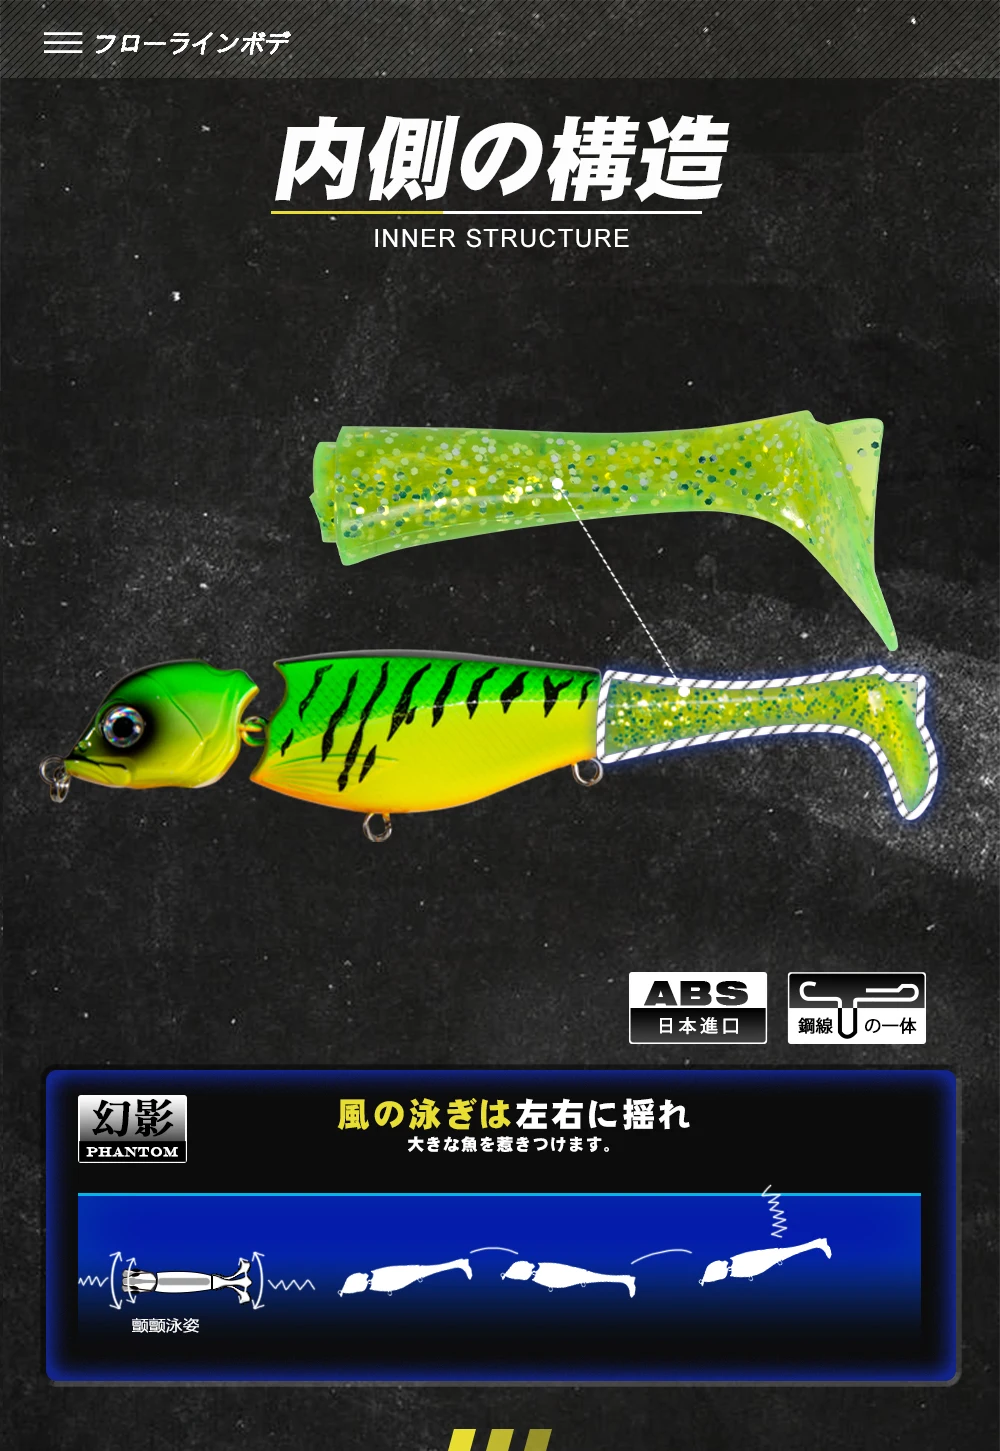 https://ae01.alicdn.com/kf/Hf2e44e4af49743c9a2da18537d0cf60aP/D1-Swimbait-With-Soft-Tail-Fishing-Lures-Slow-Sinking-Pike-Lures-Wobblers-152mm-32g-bass-hard.jpg